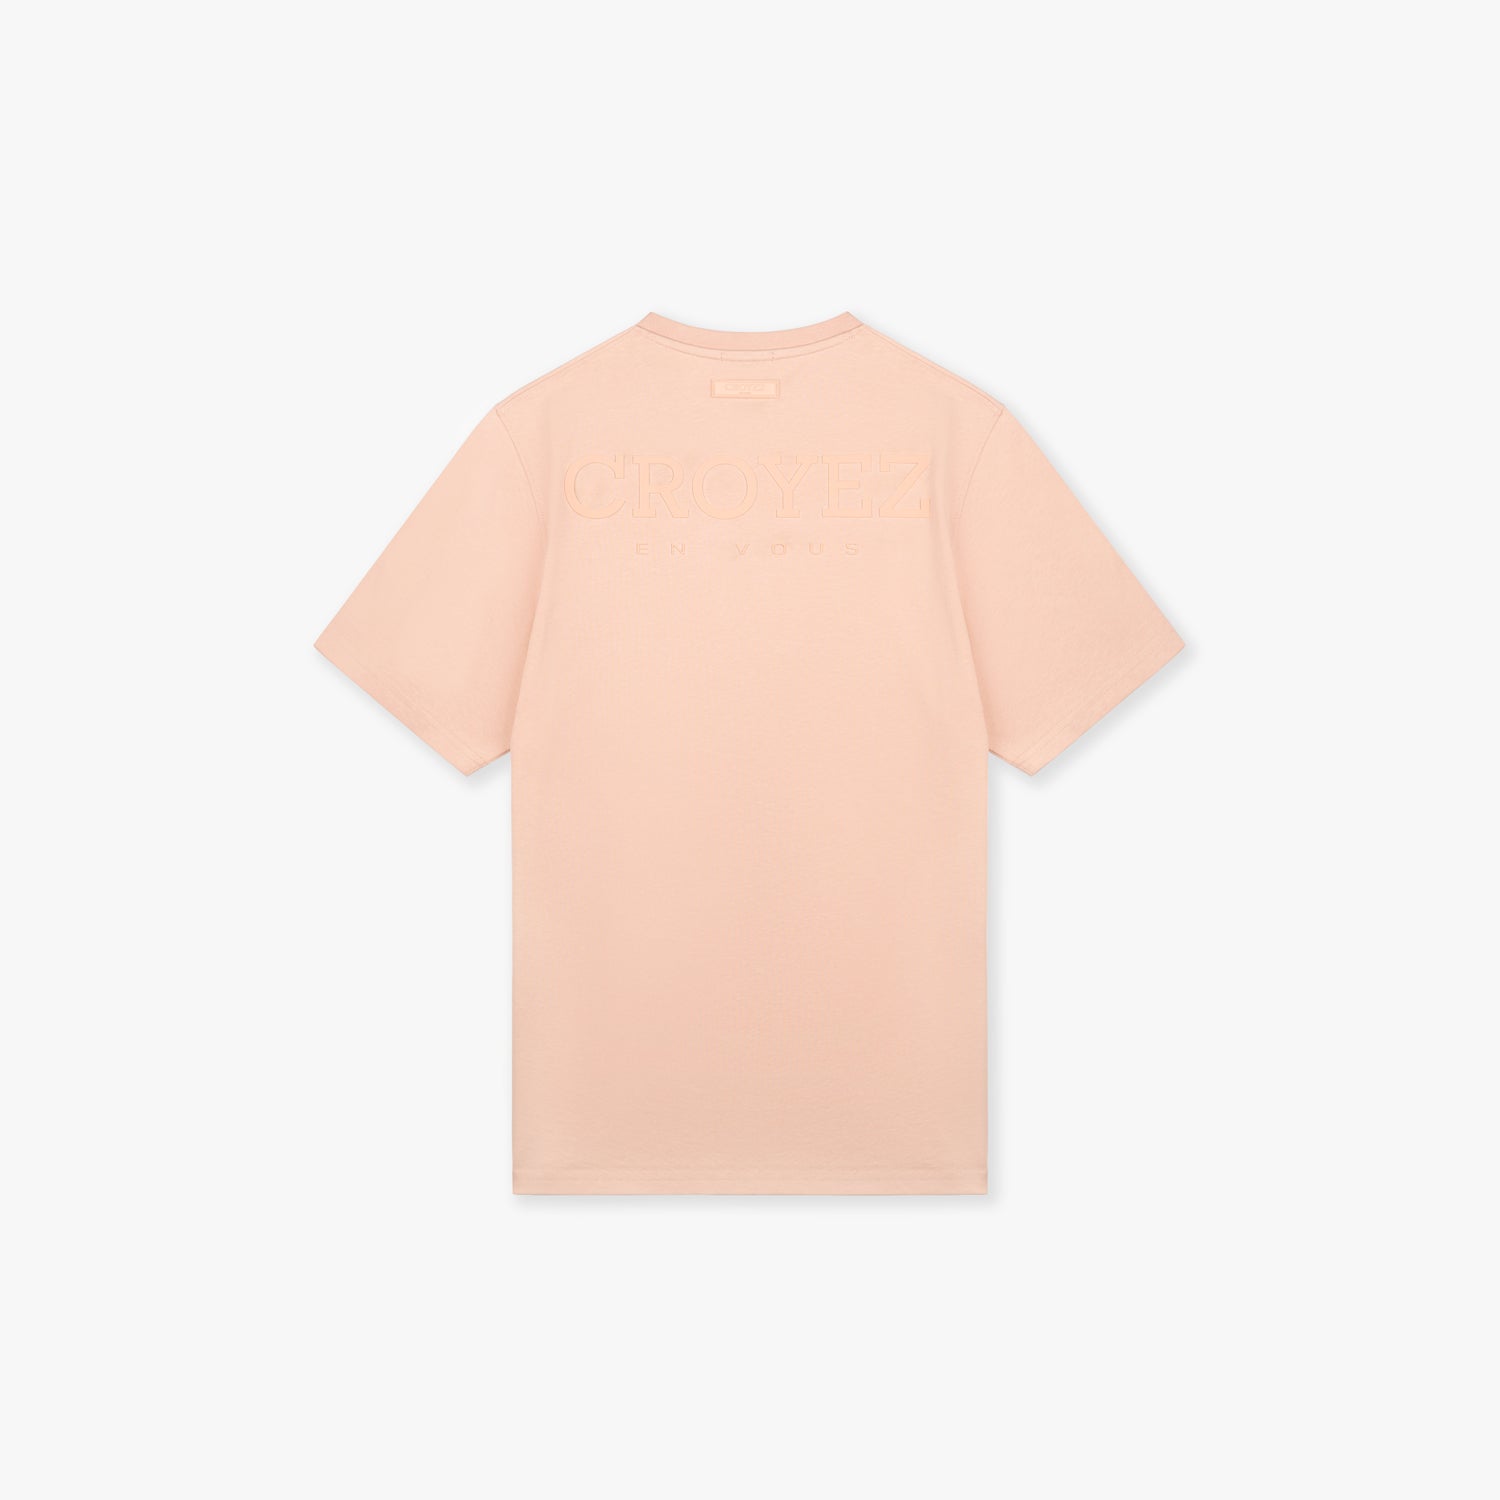 CROYEZ ABSTRACT T-SHIRT - PINK